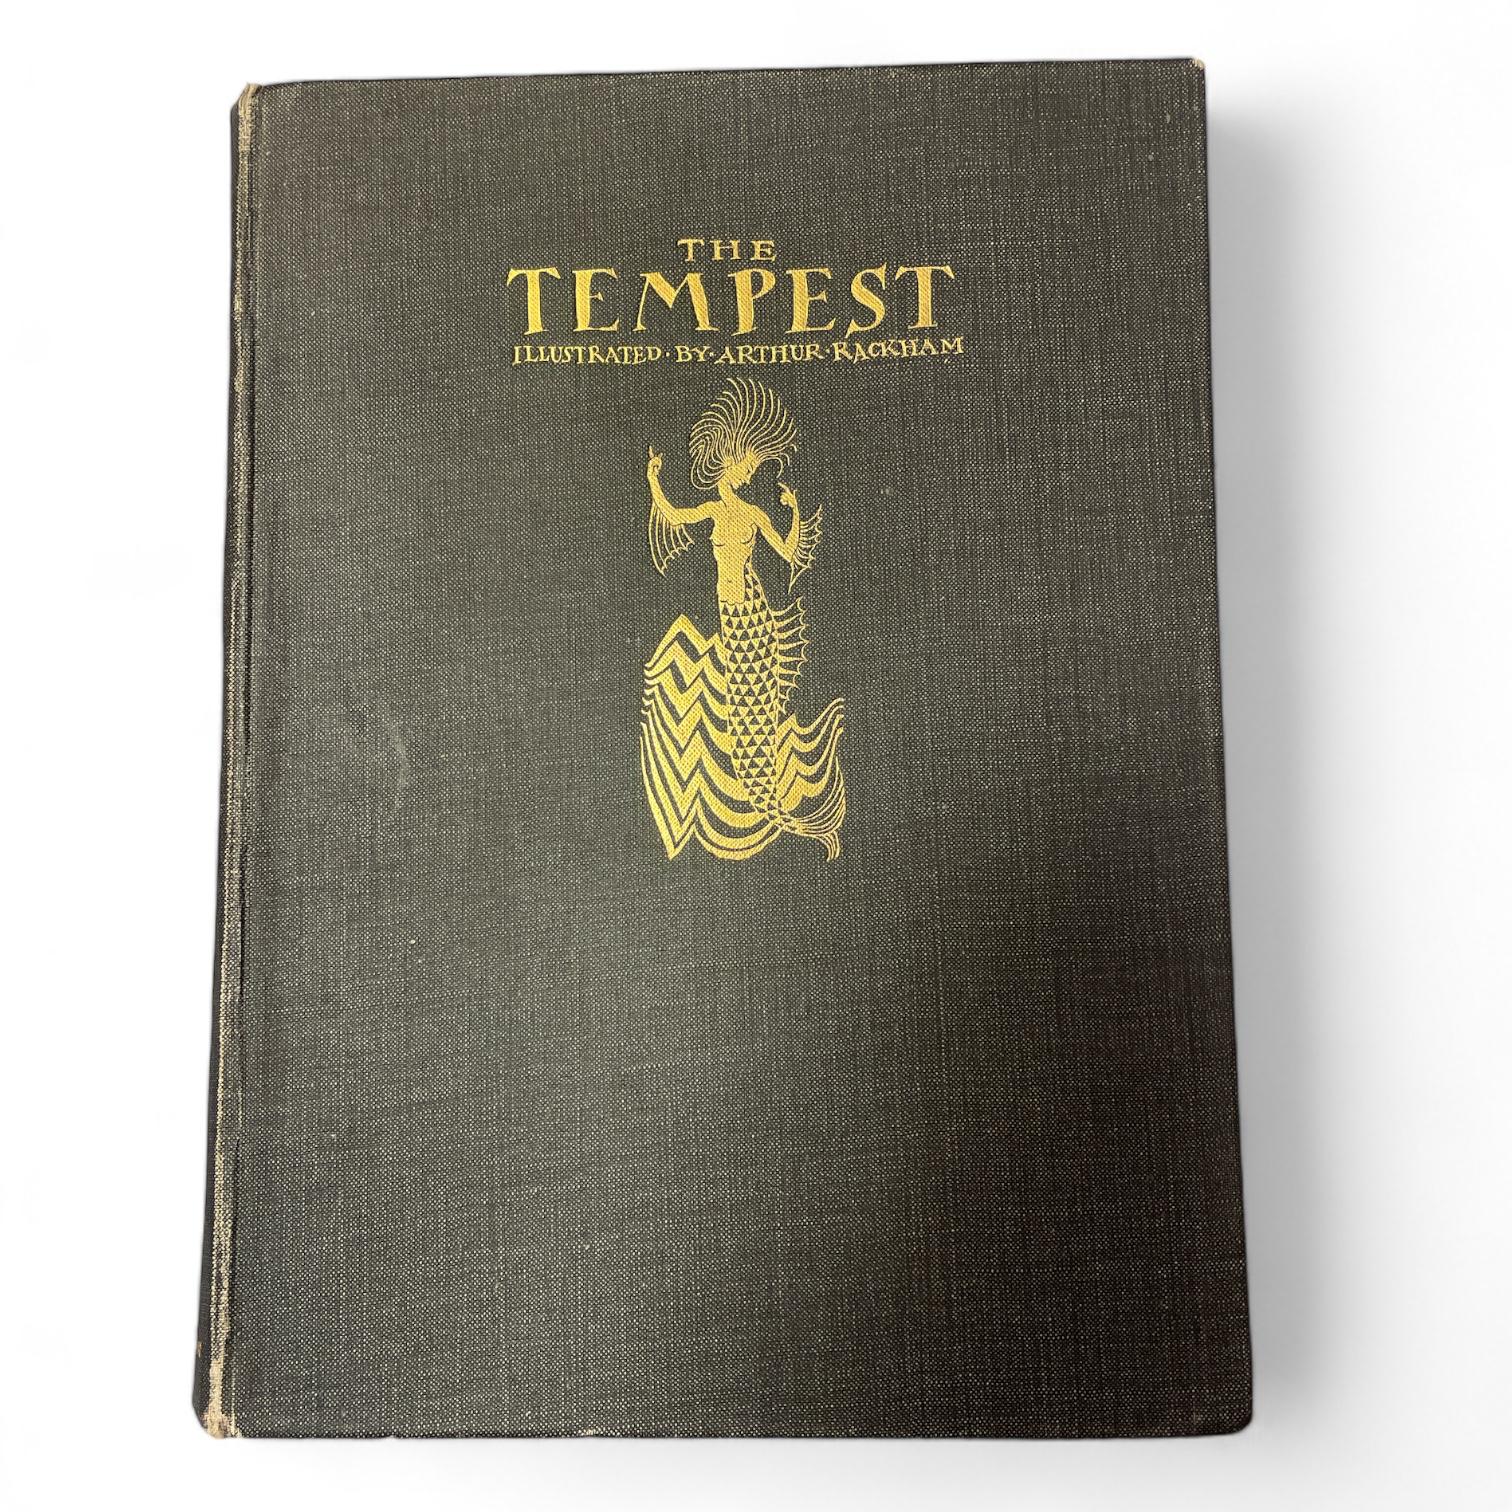 A first edition THUS 1926 The Tempest, William Shakespeare illustrated by Arthur Rackham printed